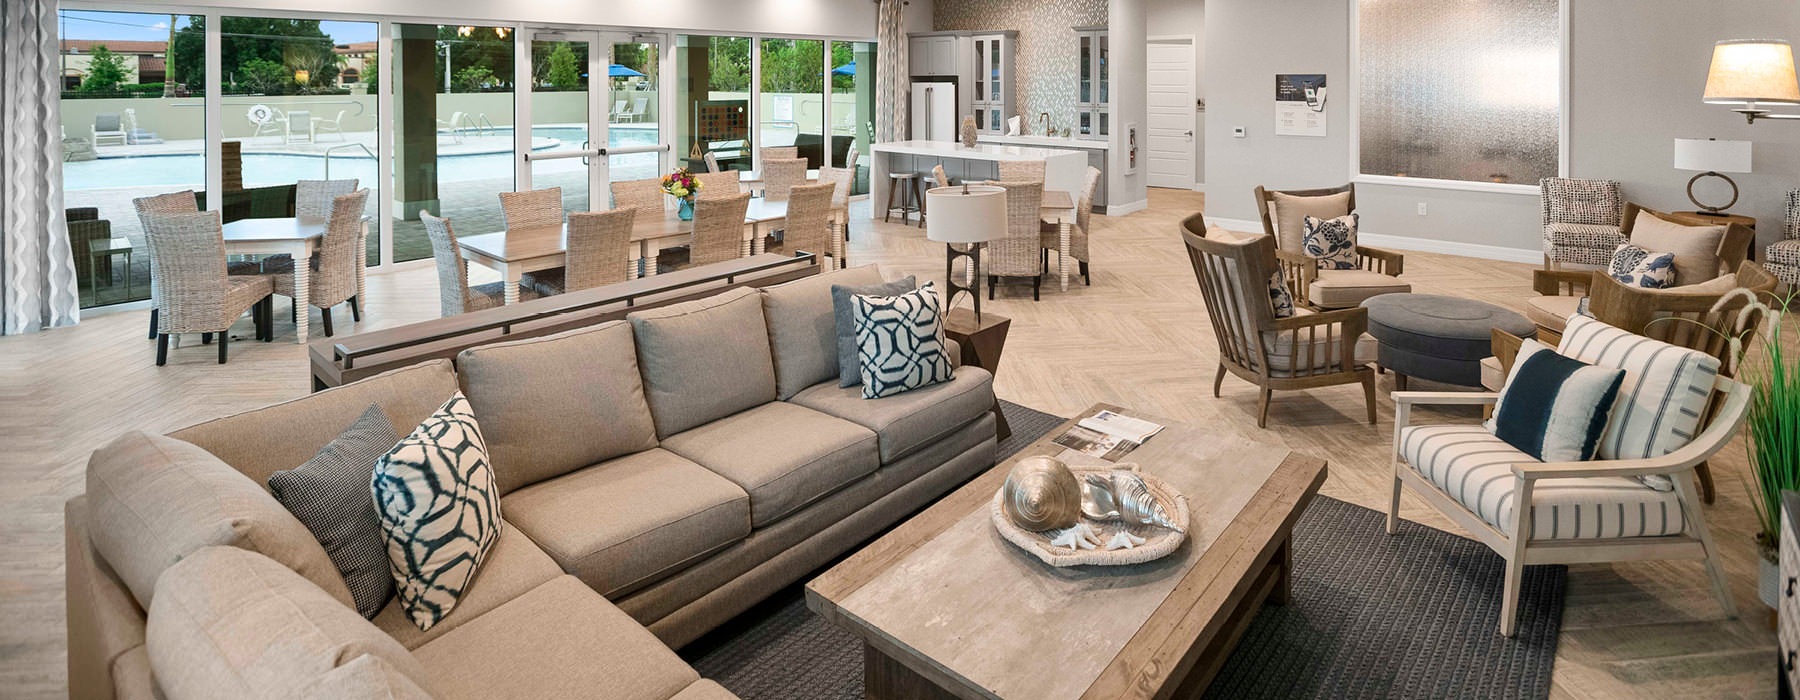 spacious resident lounge with social areas